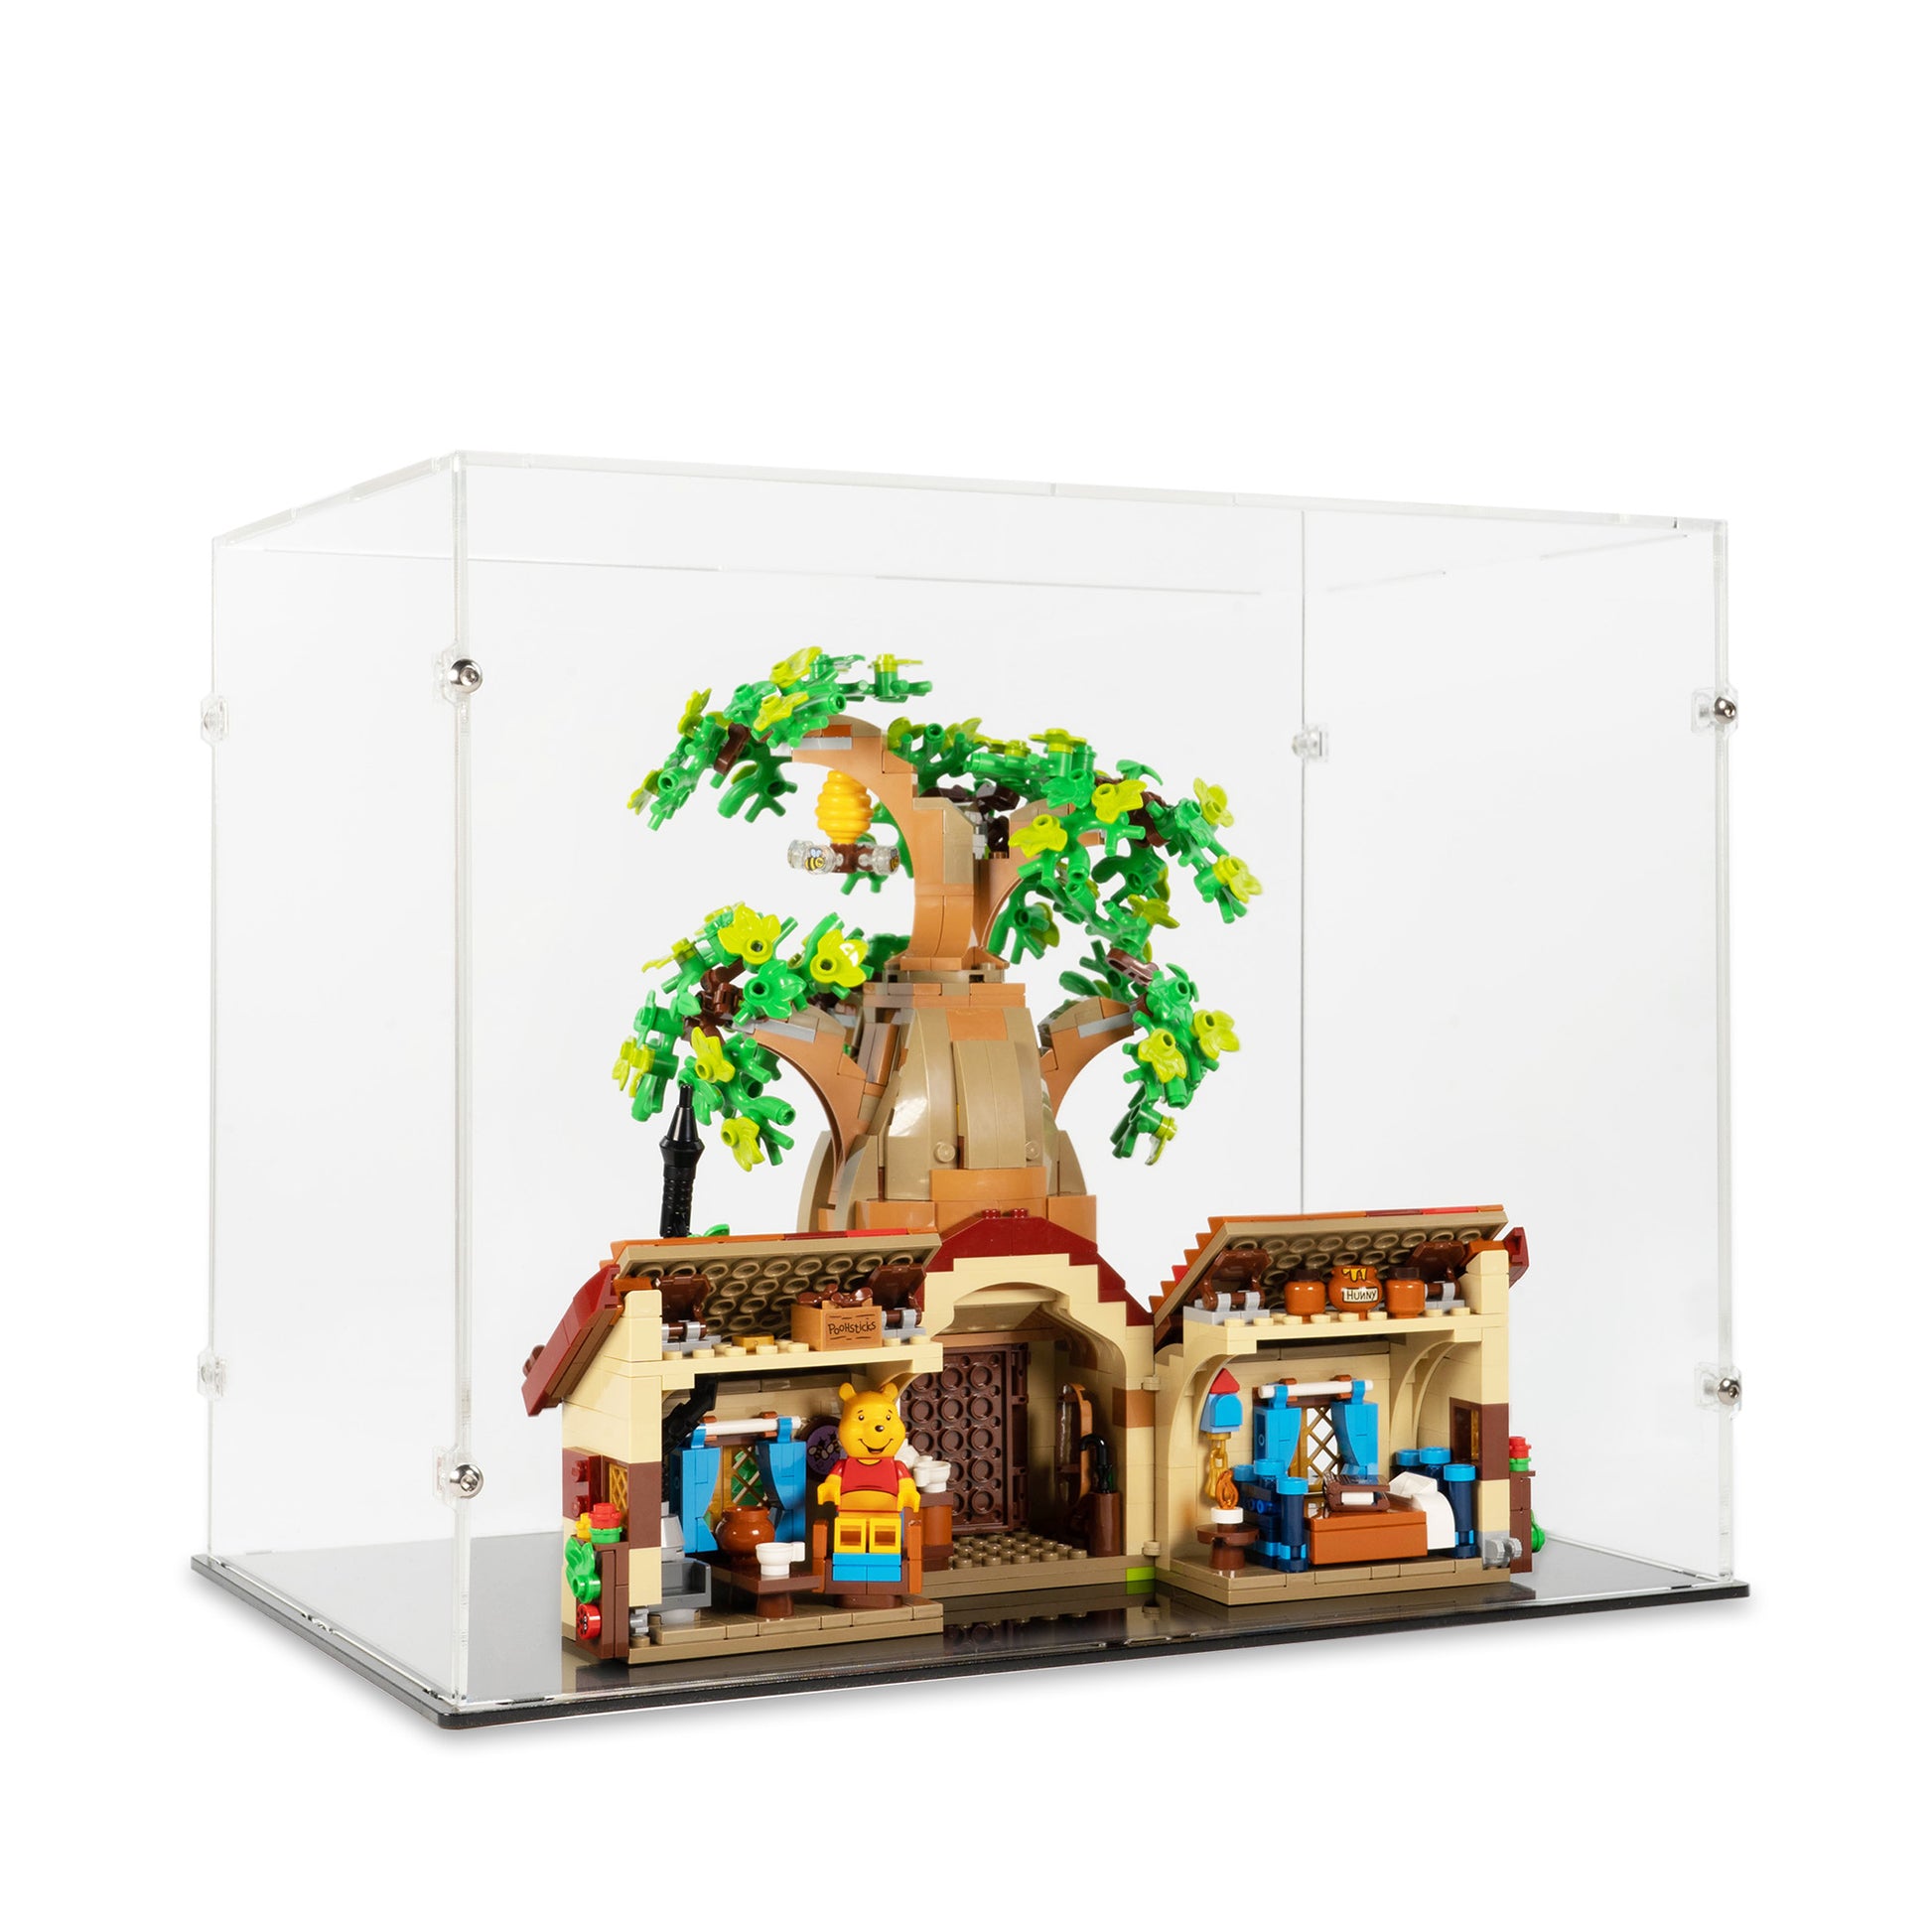 Back angled open view of LEGO 21326 Winnie the Pooh Display Case.